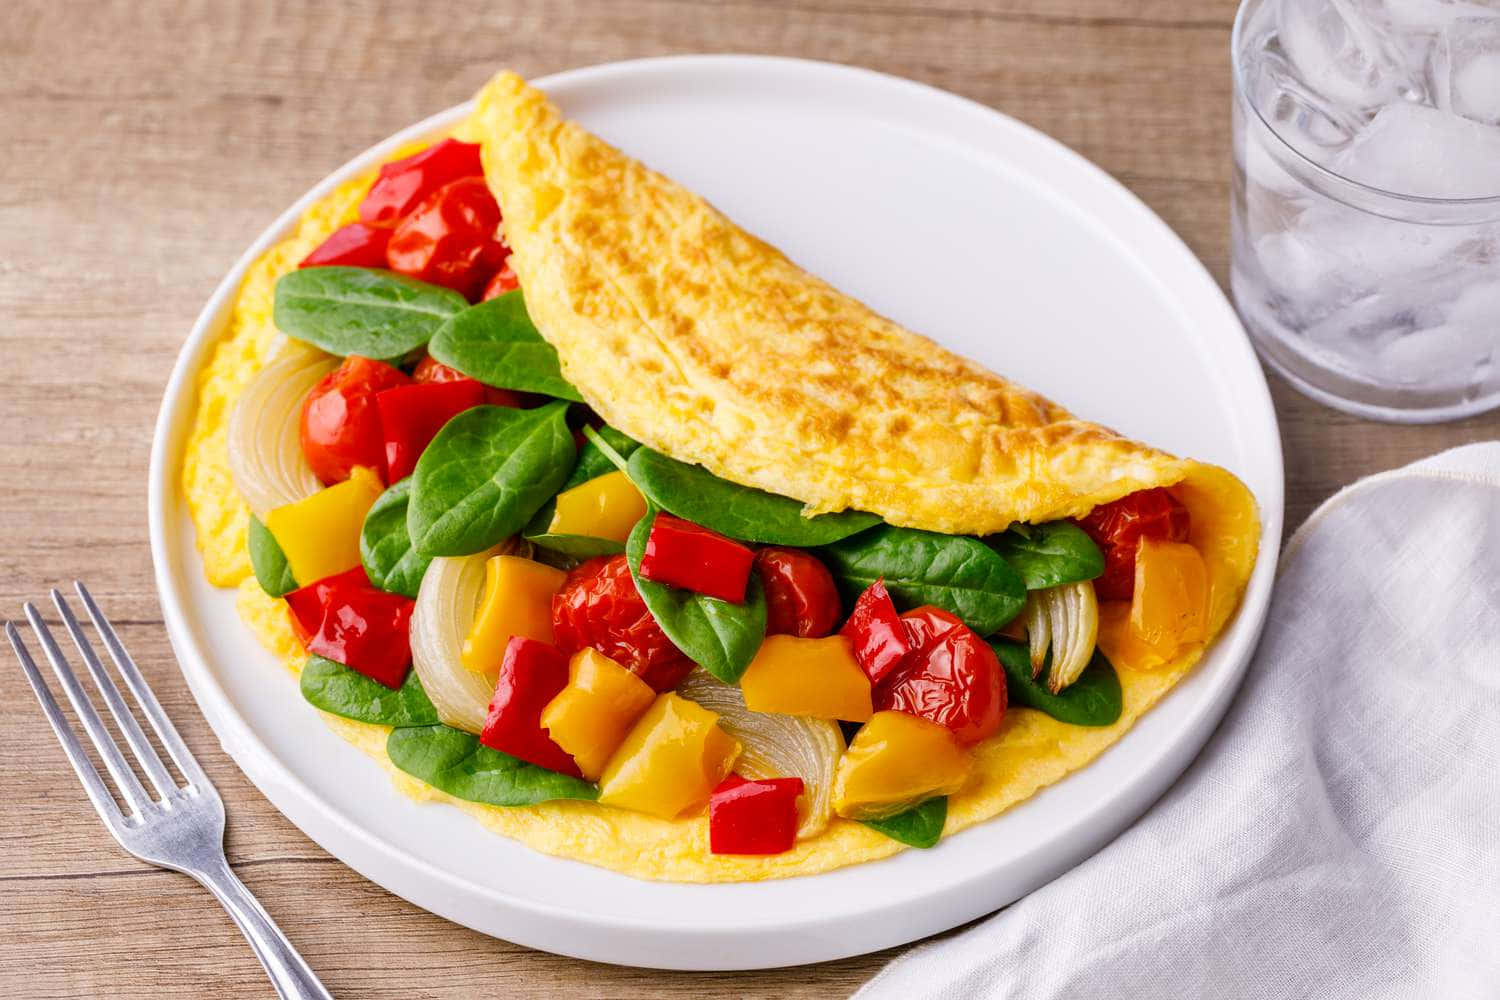 Omelet With Vegetables And A Fork On A Plate